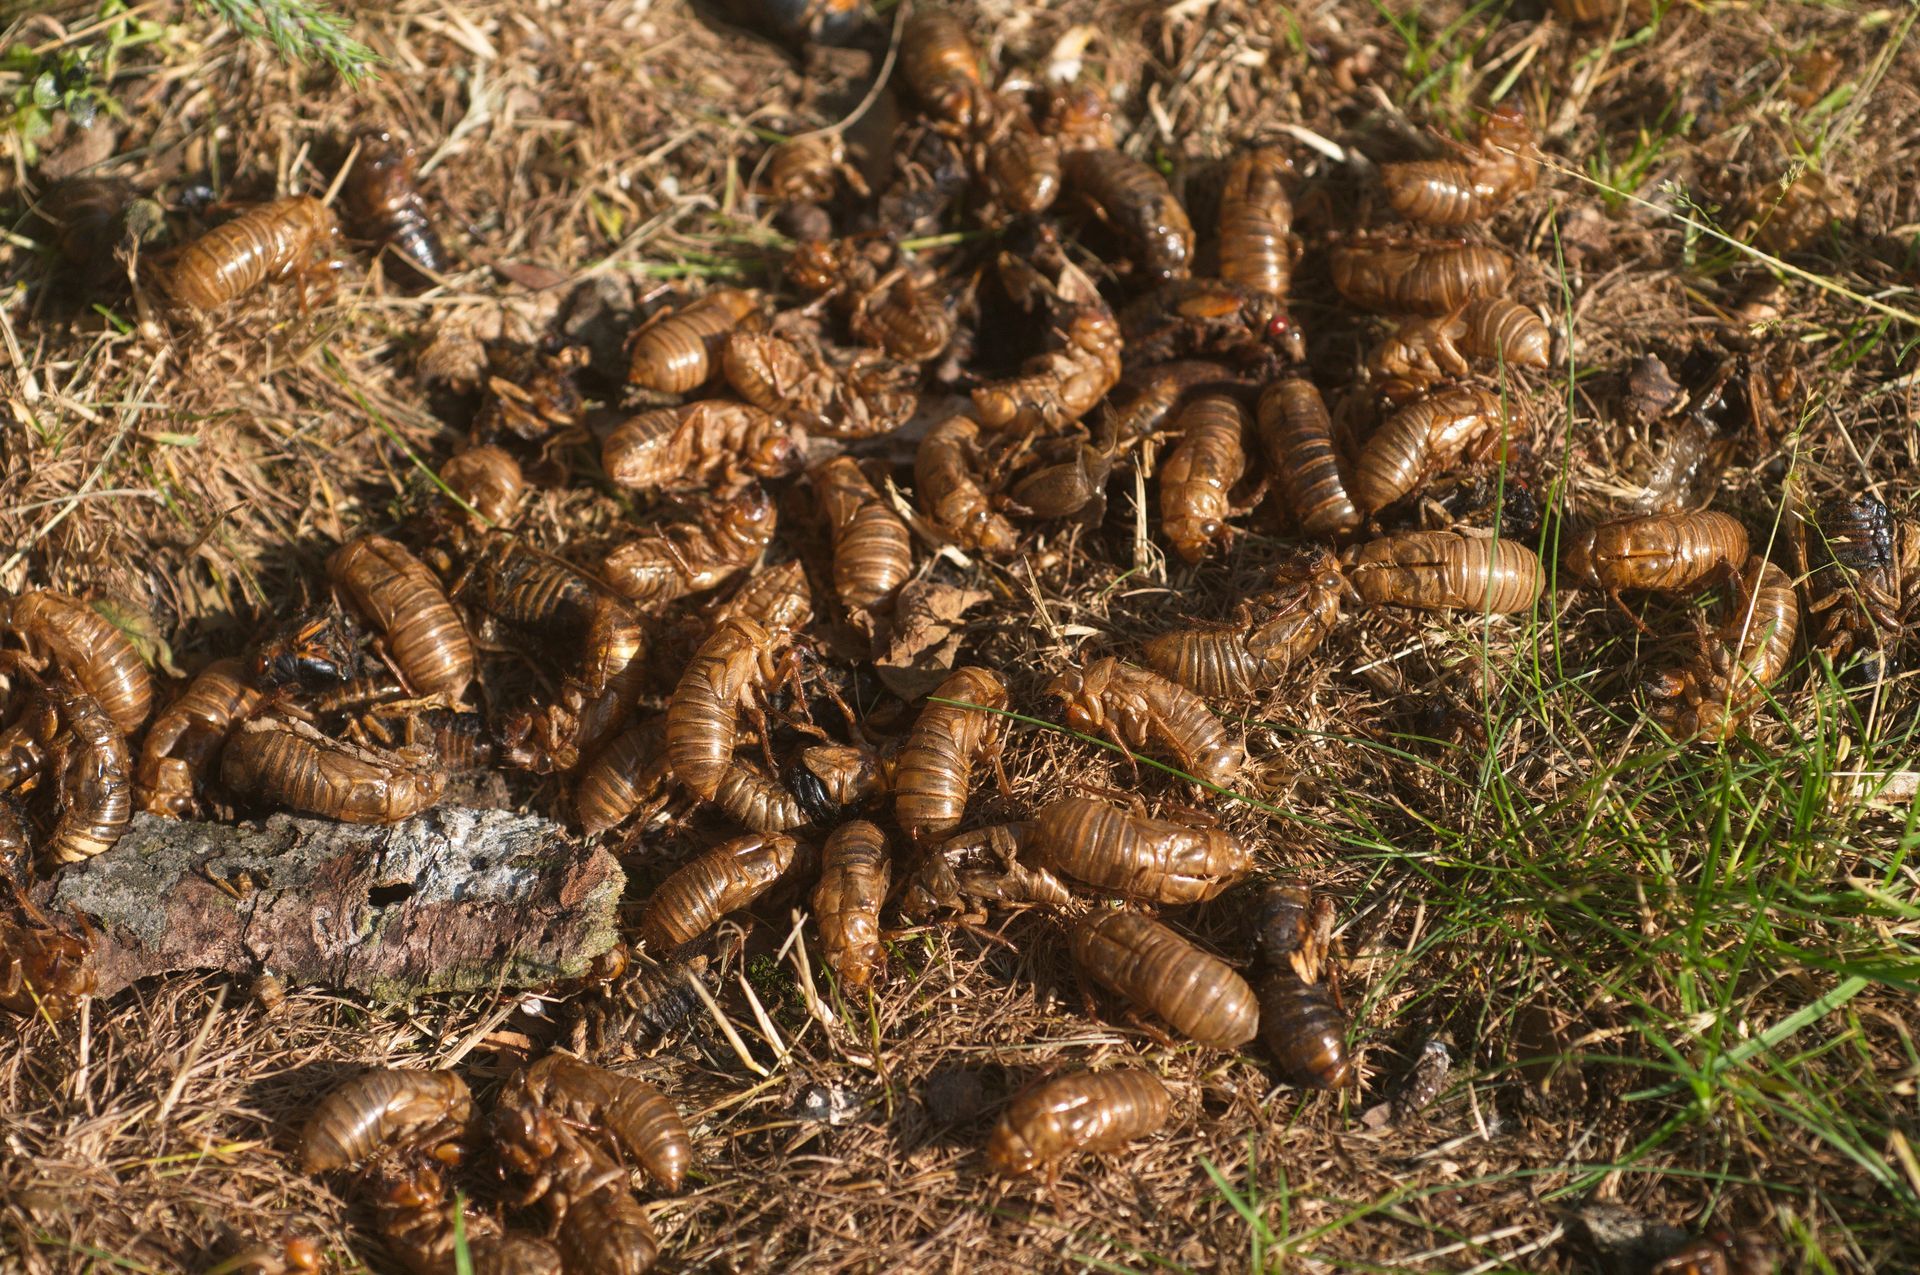 A pile of many light brown cicada exoskeletons laying on the grass.